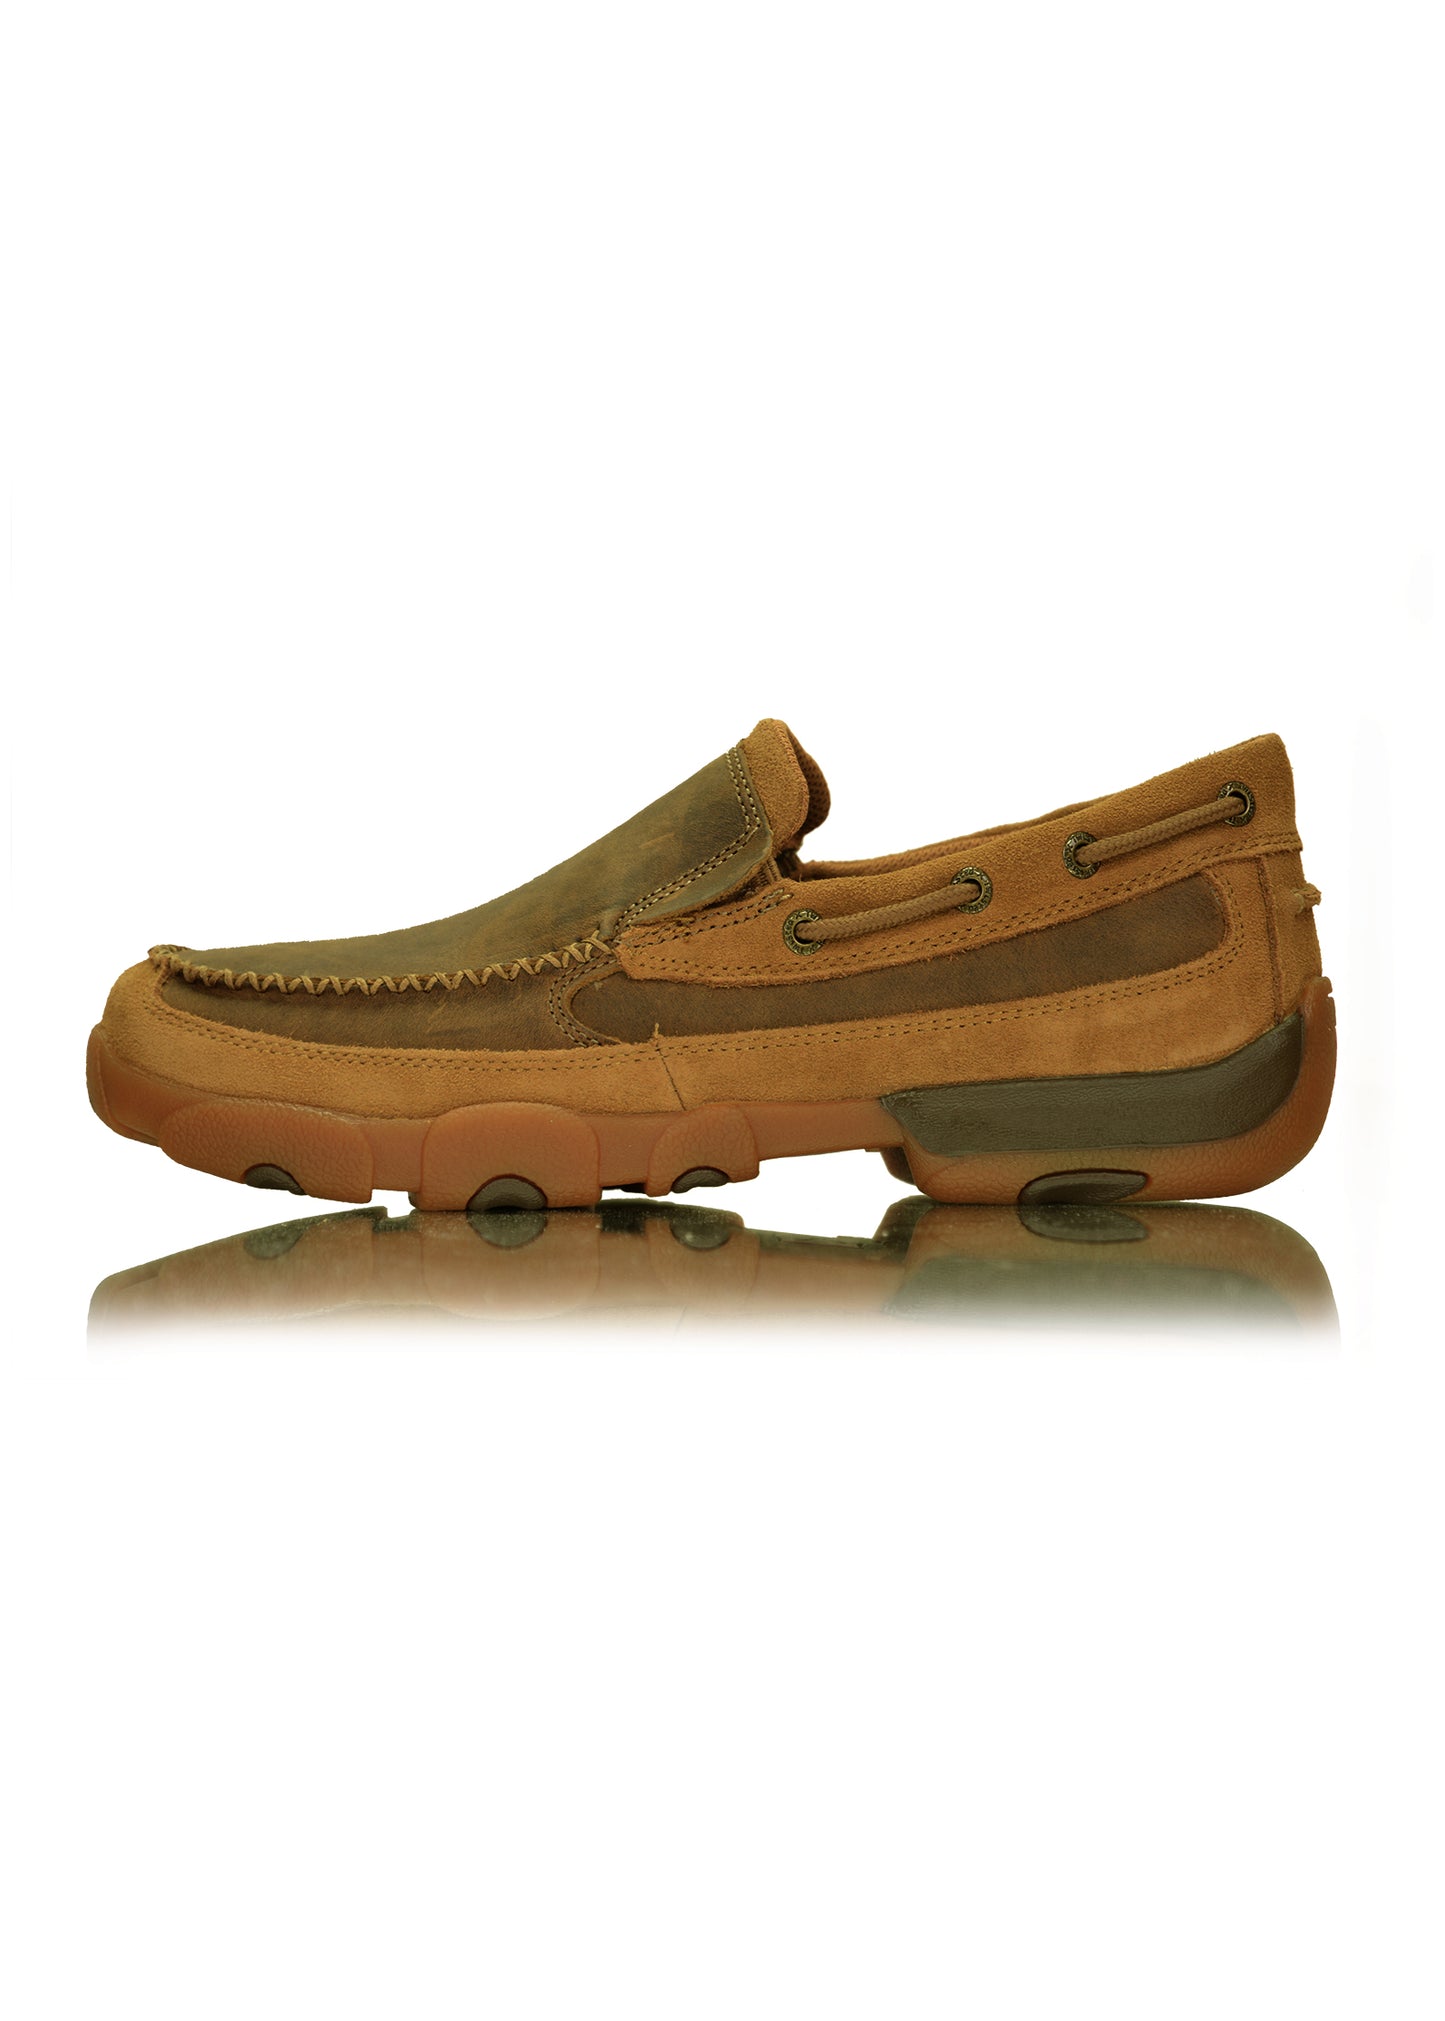 TCMXC0001 Twisted X Men's Classic Tan Cell Stretch Slip on